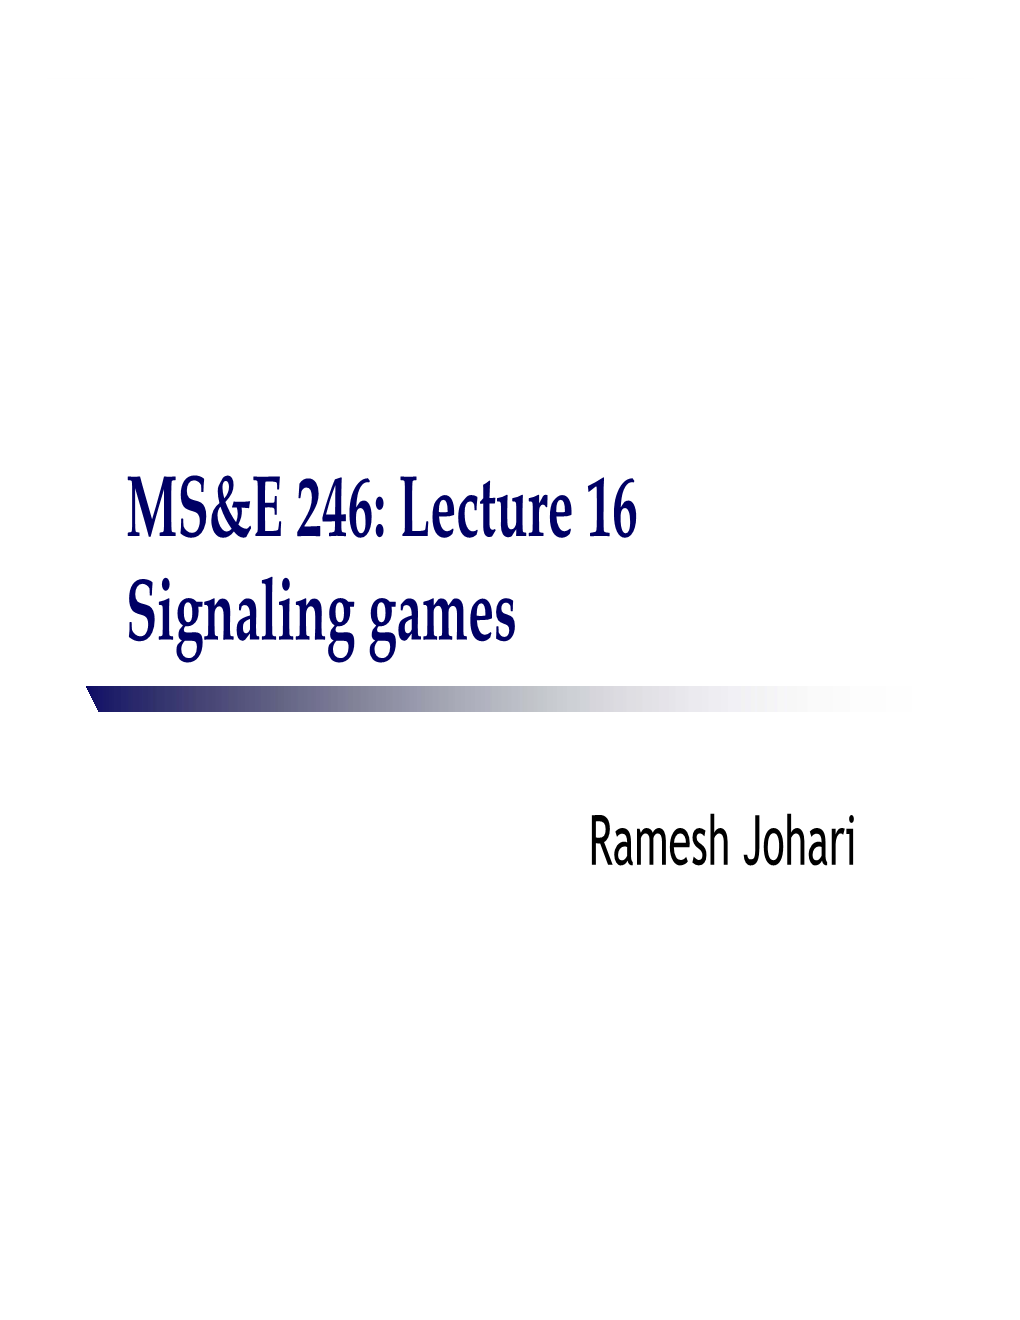 MS&E 246: Lecture 16 Signaling Games